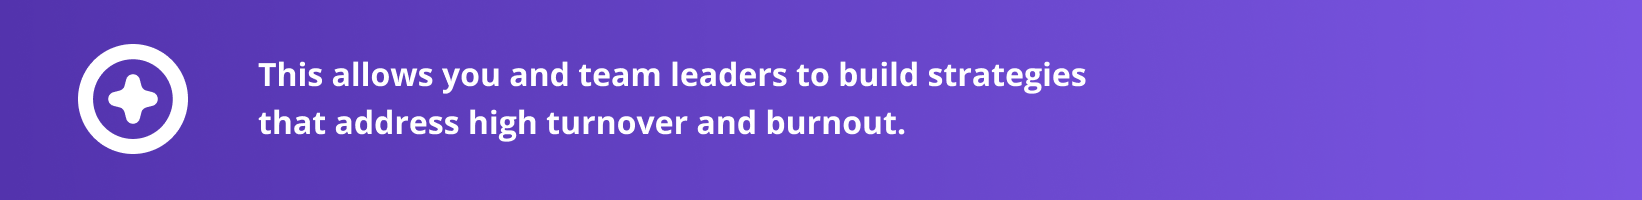 This allows you and team leaders to build strategies